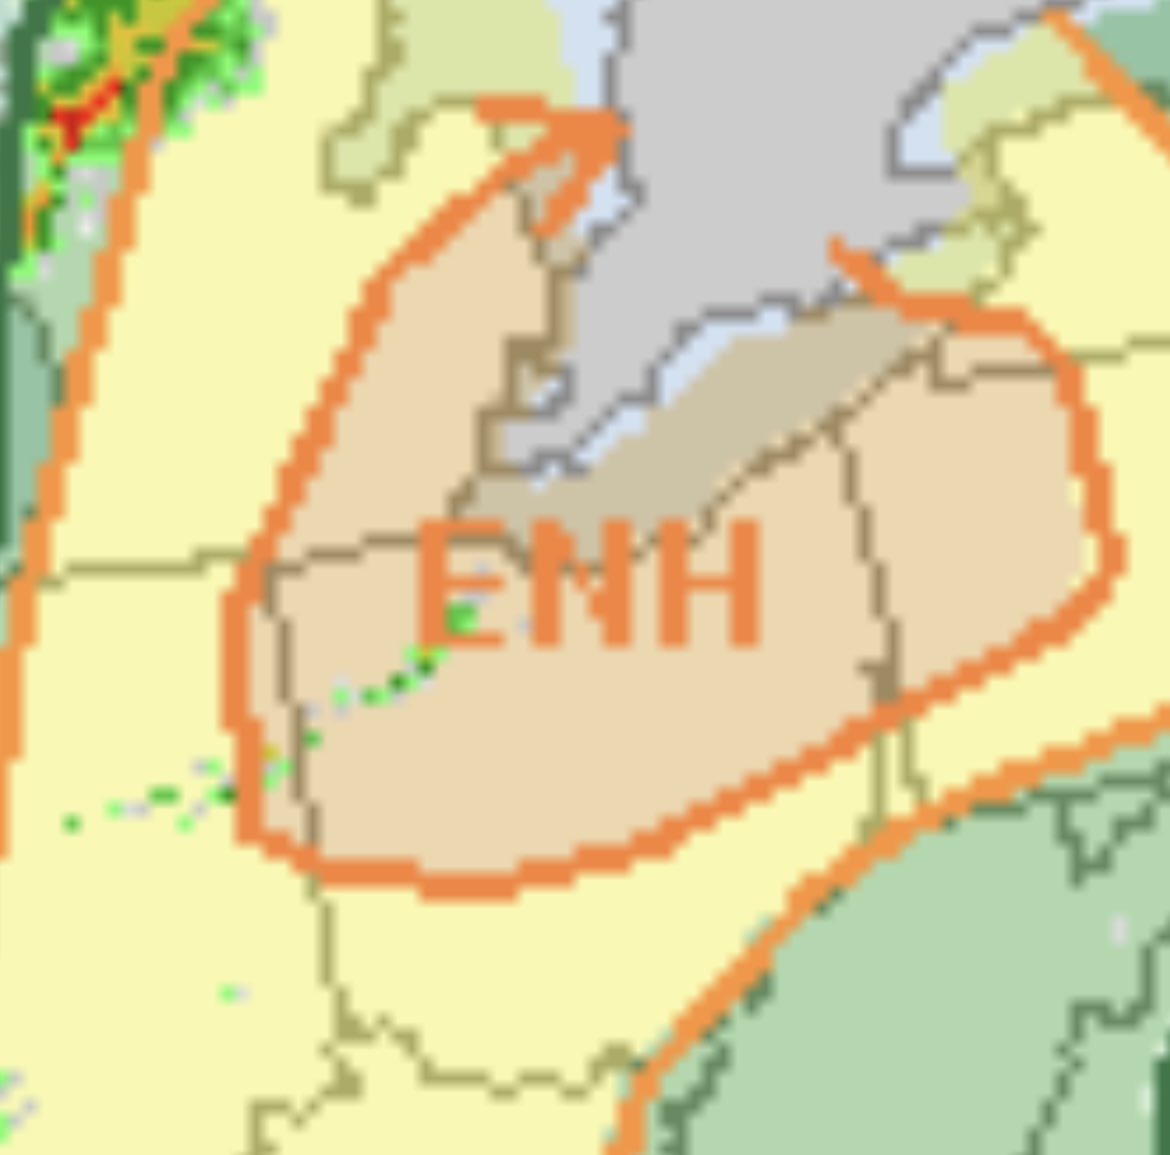 A rather rare ENHANCED risk (3 out of 5) for severe weather today for all of northern Ohio. Looks like the worst stuff - damaging winds / hail - moves in after 6pm. We’ll be all over it. Stay safe.